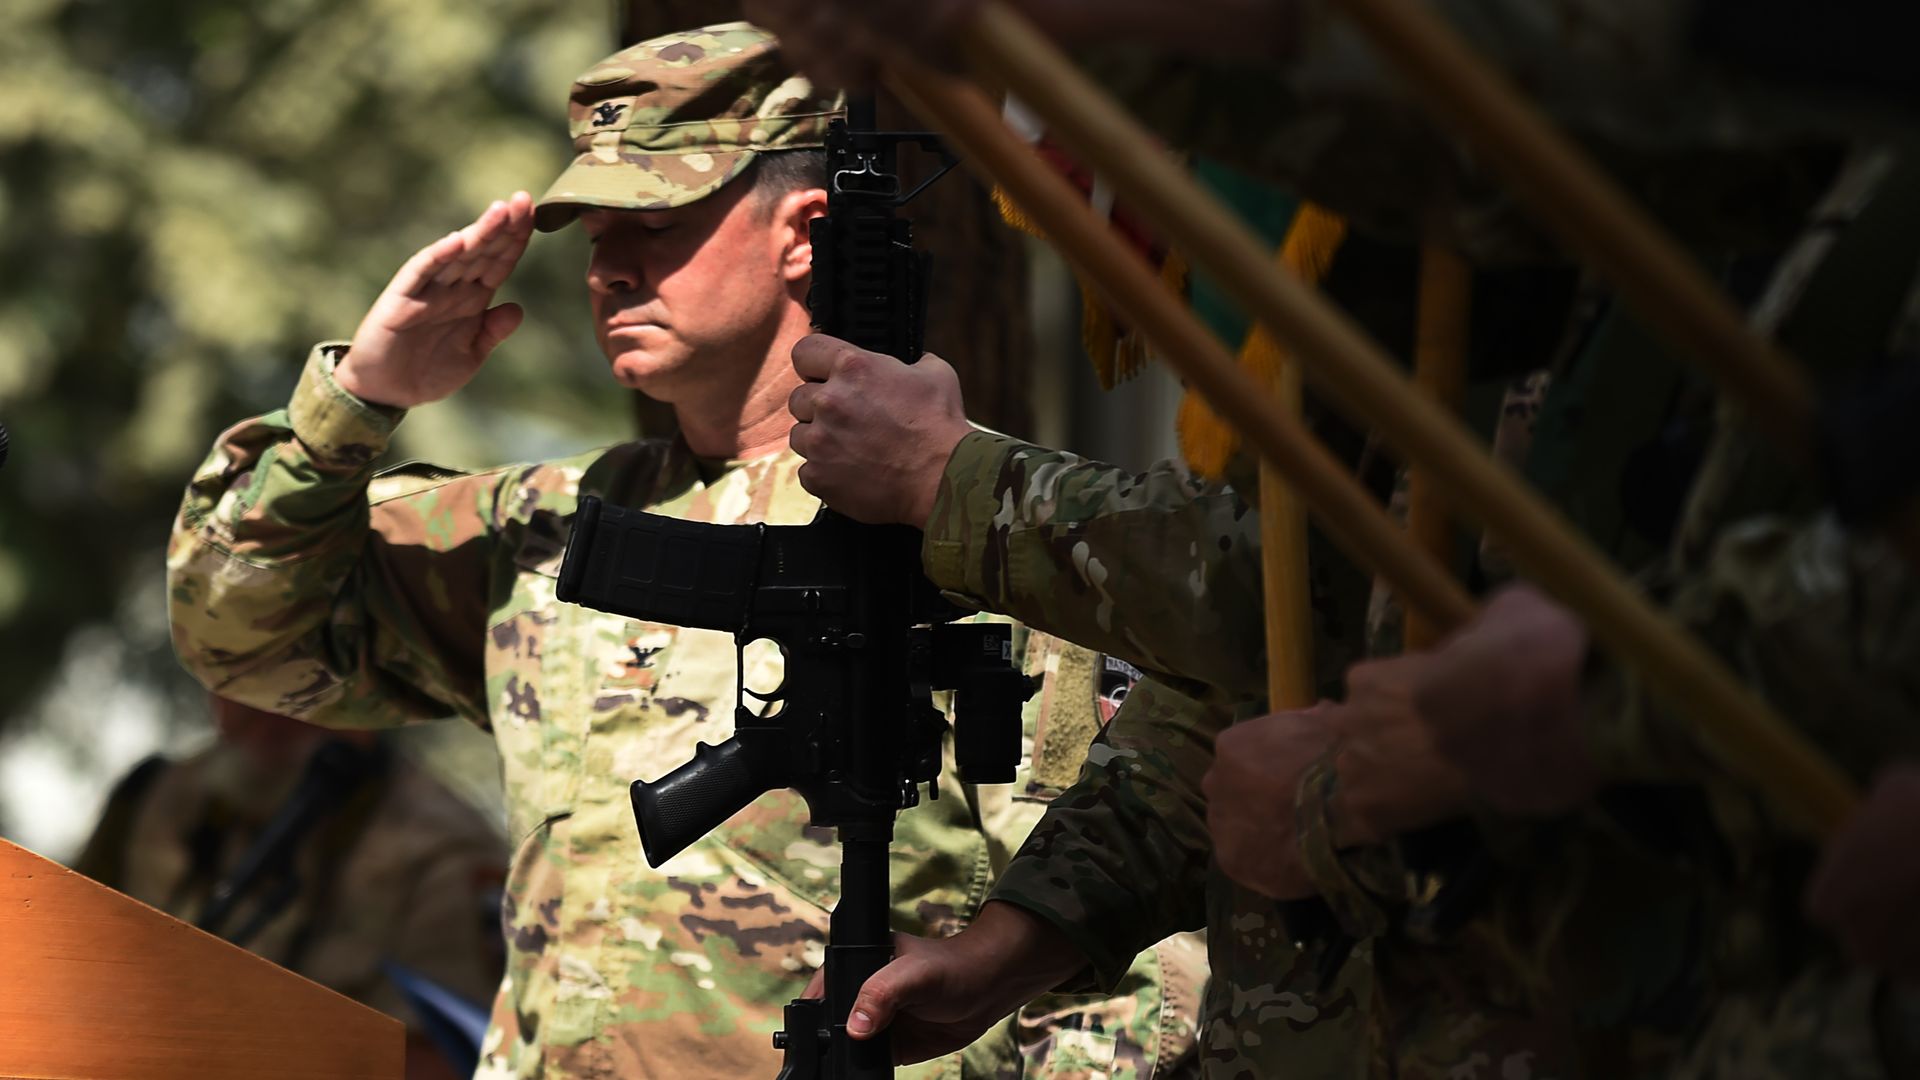 U.S. soldier salutes, behind a silhouette of a gun.